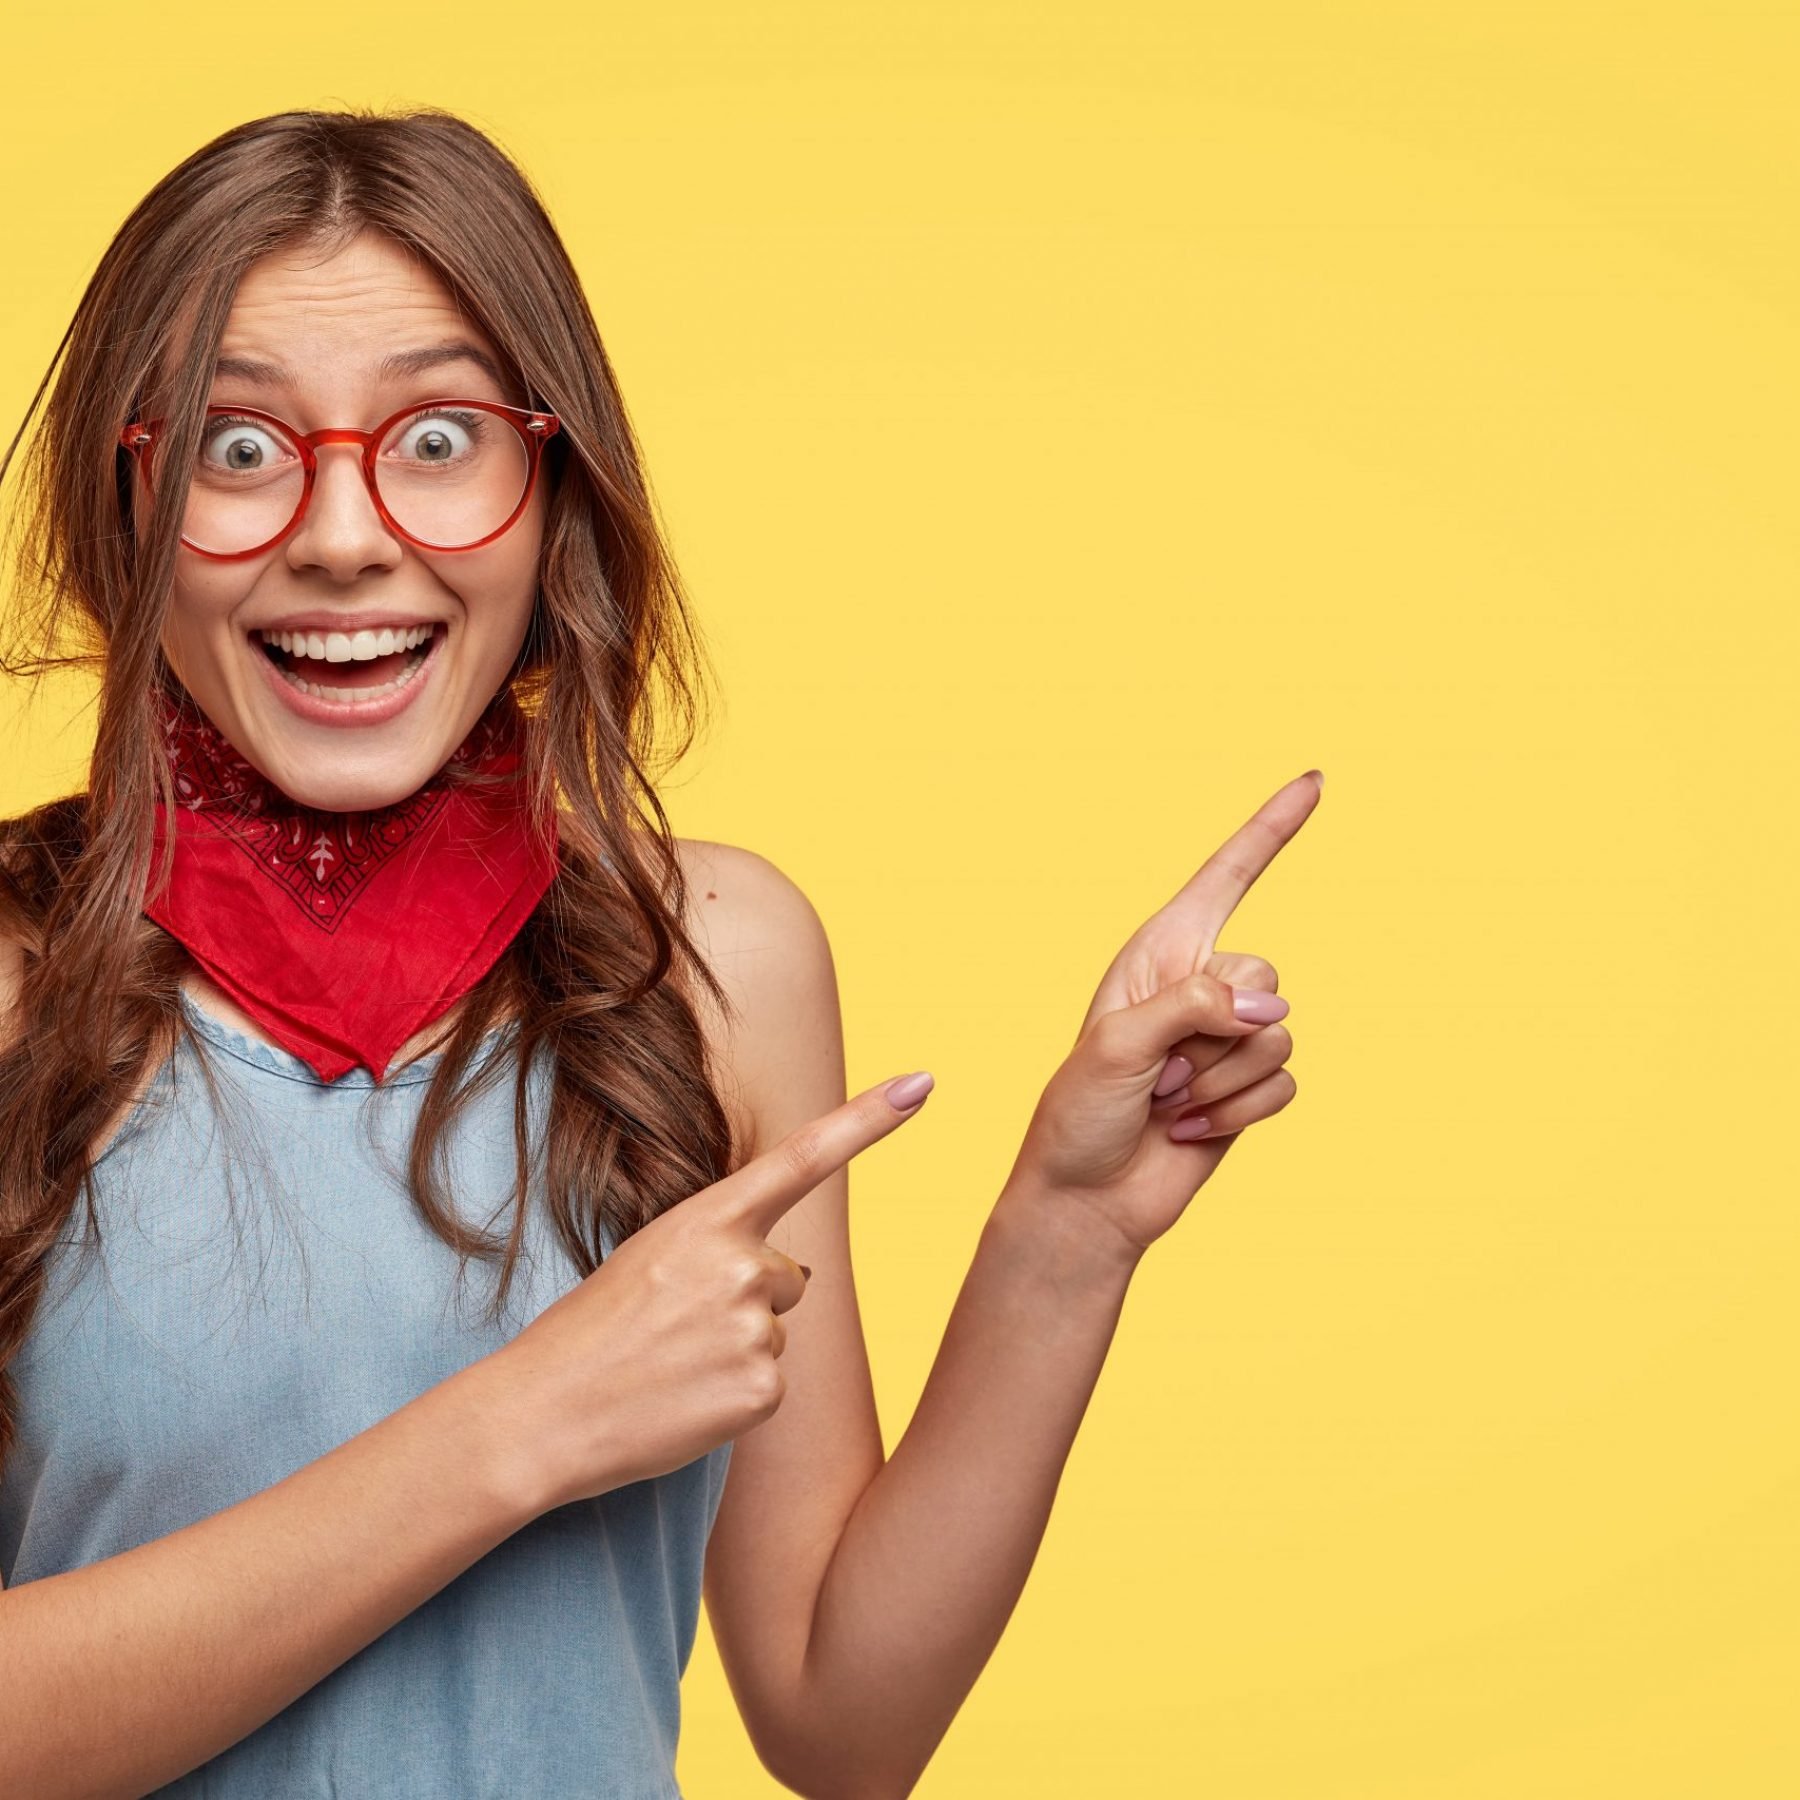 friendly-carefree-female-shop-assistant-points-right-has-board-smile-advertises-new-outfit-with-big-discounts-wears-transparent-glasses-models-against-yellow-wall-with-copy-space-for-slogan (1)